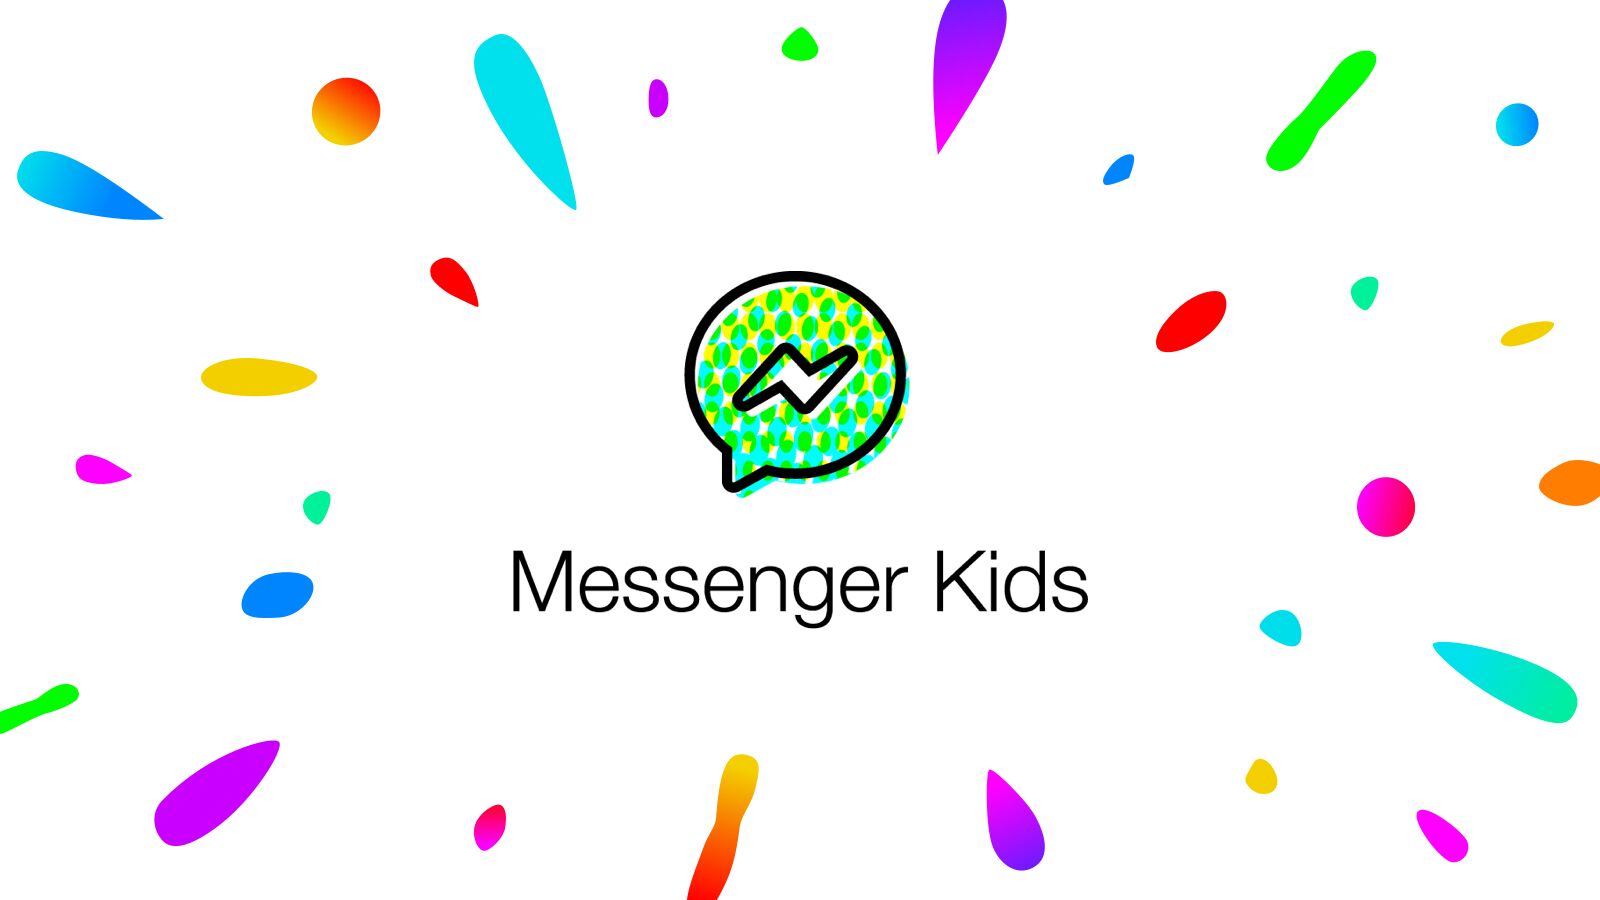 Messenger Kids launched, A new app for families to connect 3